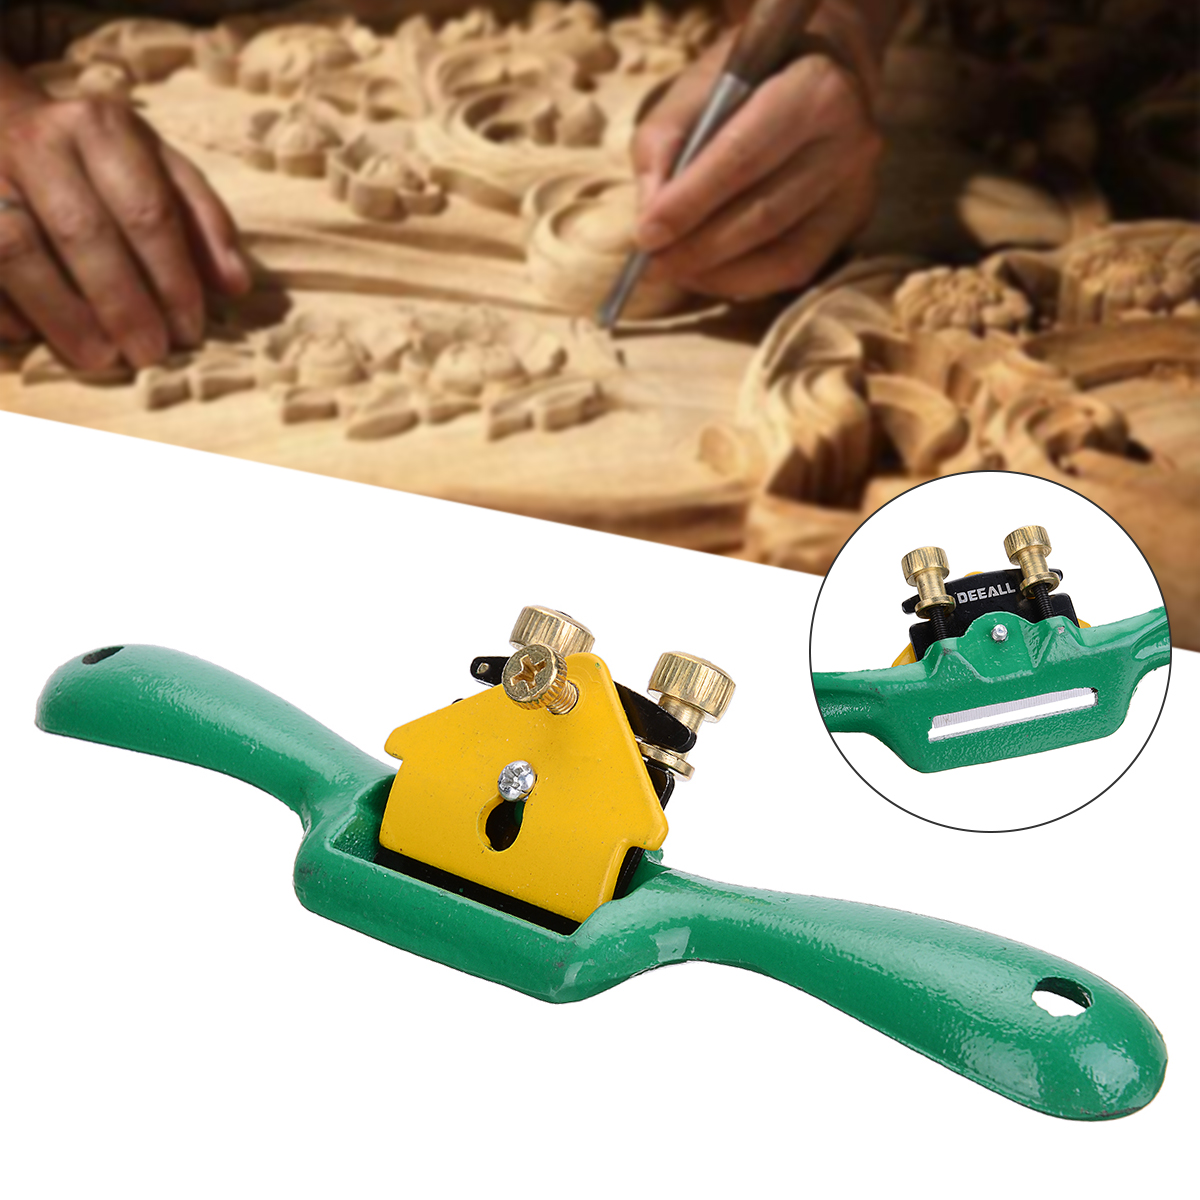 Mayitr Iron Spoke Shave Plane 44mm Metal Cutting Edge Wood Shaping For Woodworker Woodworking Machinery